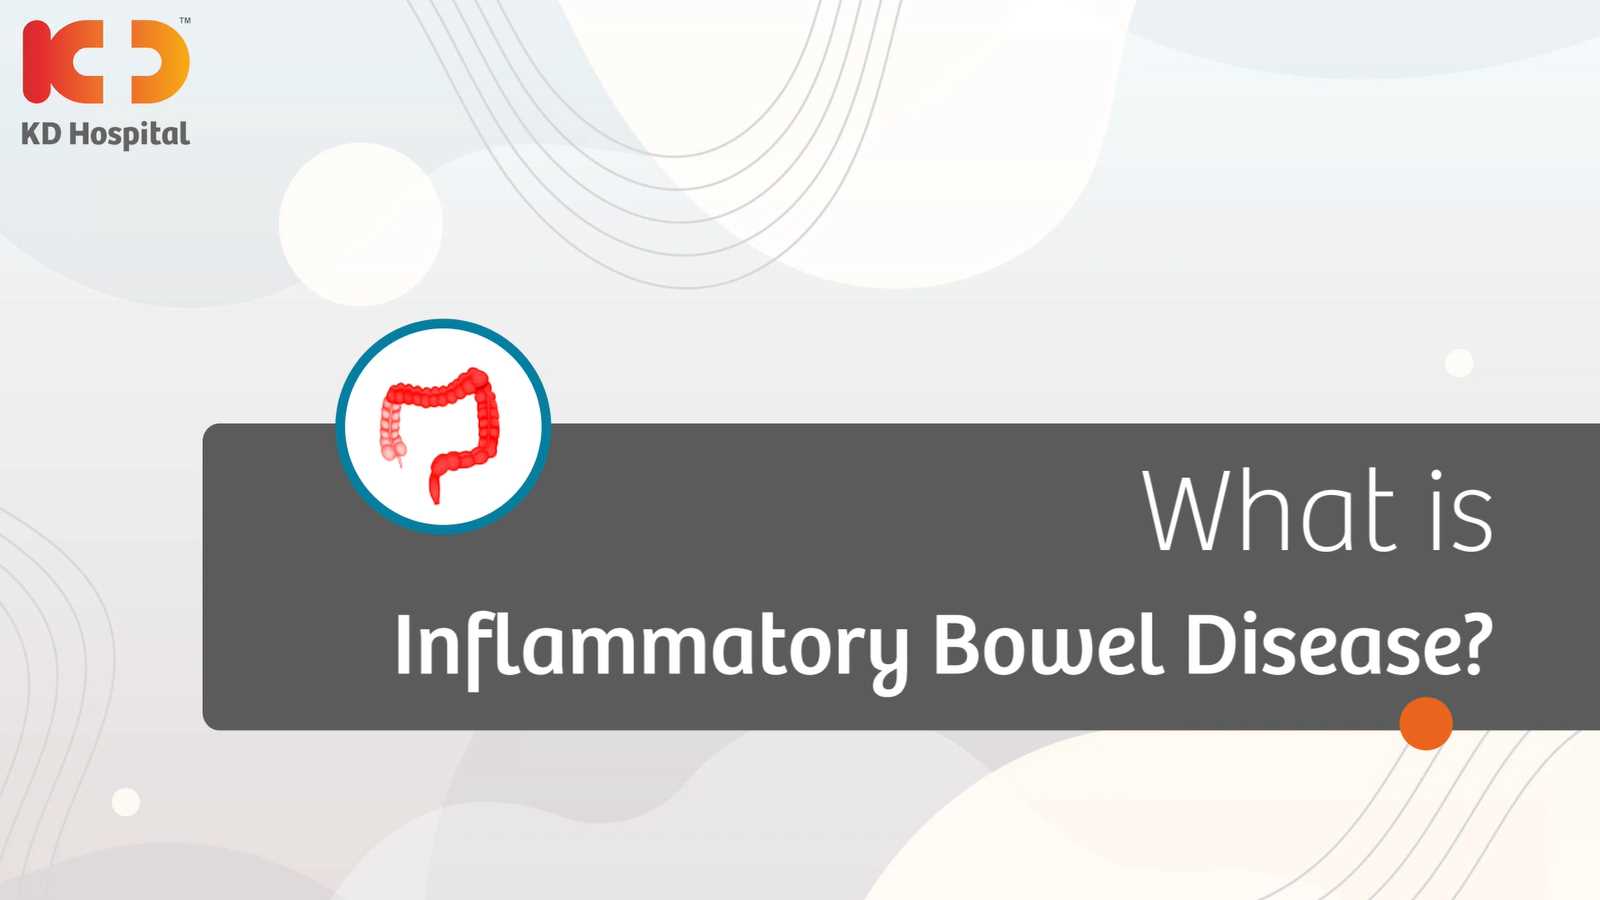 Inflammatory Bowel Disease is a group of inflammatory conditions which mainly affect the colon and small intestines. Call +919825993335 to book an appointment Now! Avail concessional Rates Until 15th August'21.

#KDHospital #GastroSciences #GastroEnterology #GastroSurgery #IB #InflammatoryBowelDisease #StomachDiseases #Inflammation #Diagnosis #Therapeutics #Awareness #wellness #goodhealth #wellnessthatworks #Nusring #NABHHospital #QualityCare #hospital #explore #healthcare #physicians #surgeon #Ahmedabad #Gujarat #India